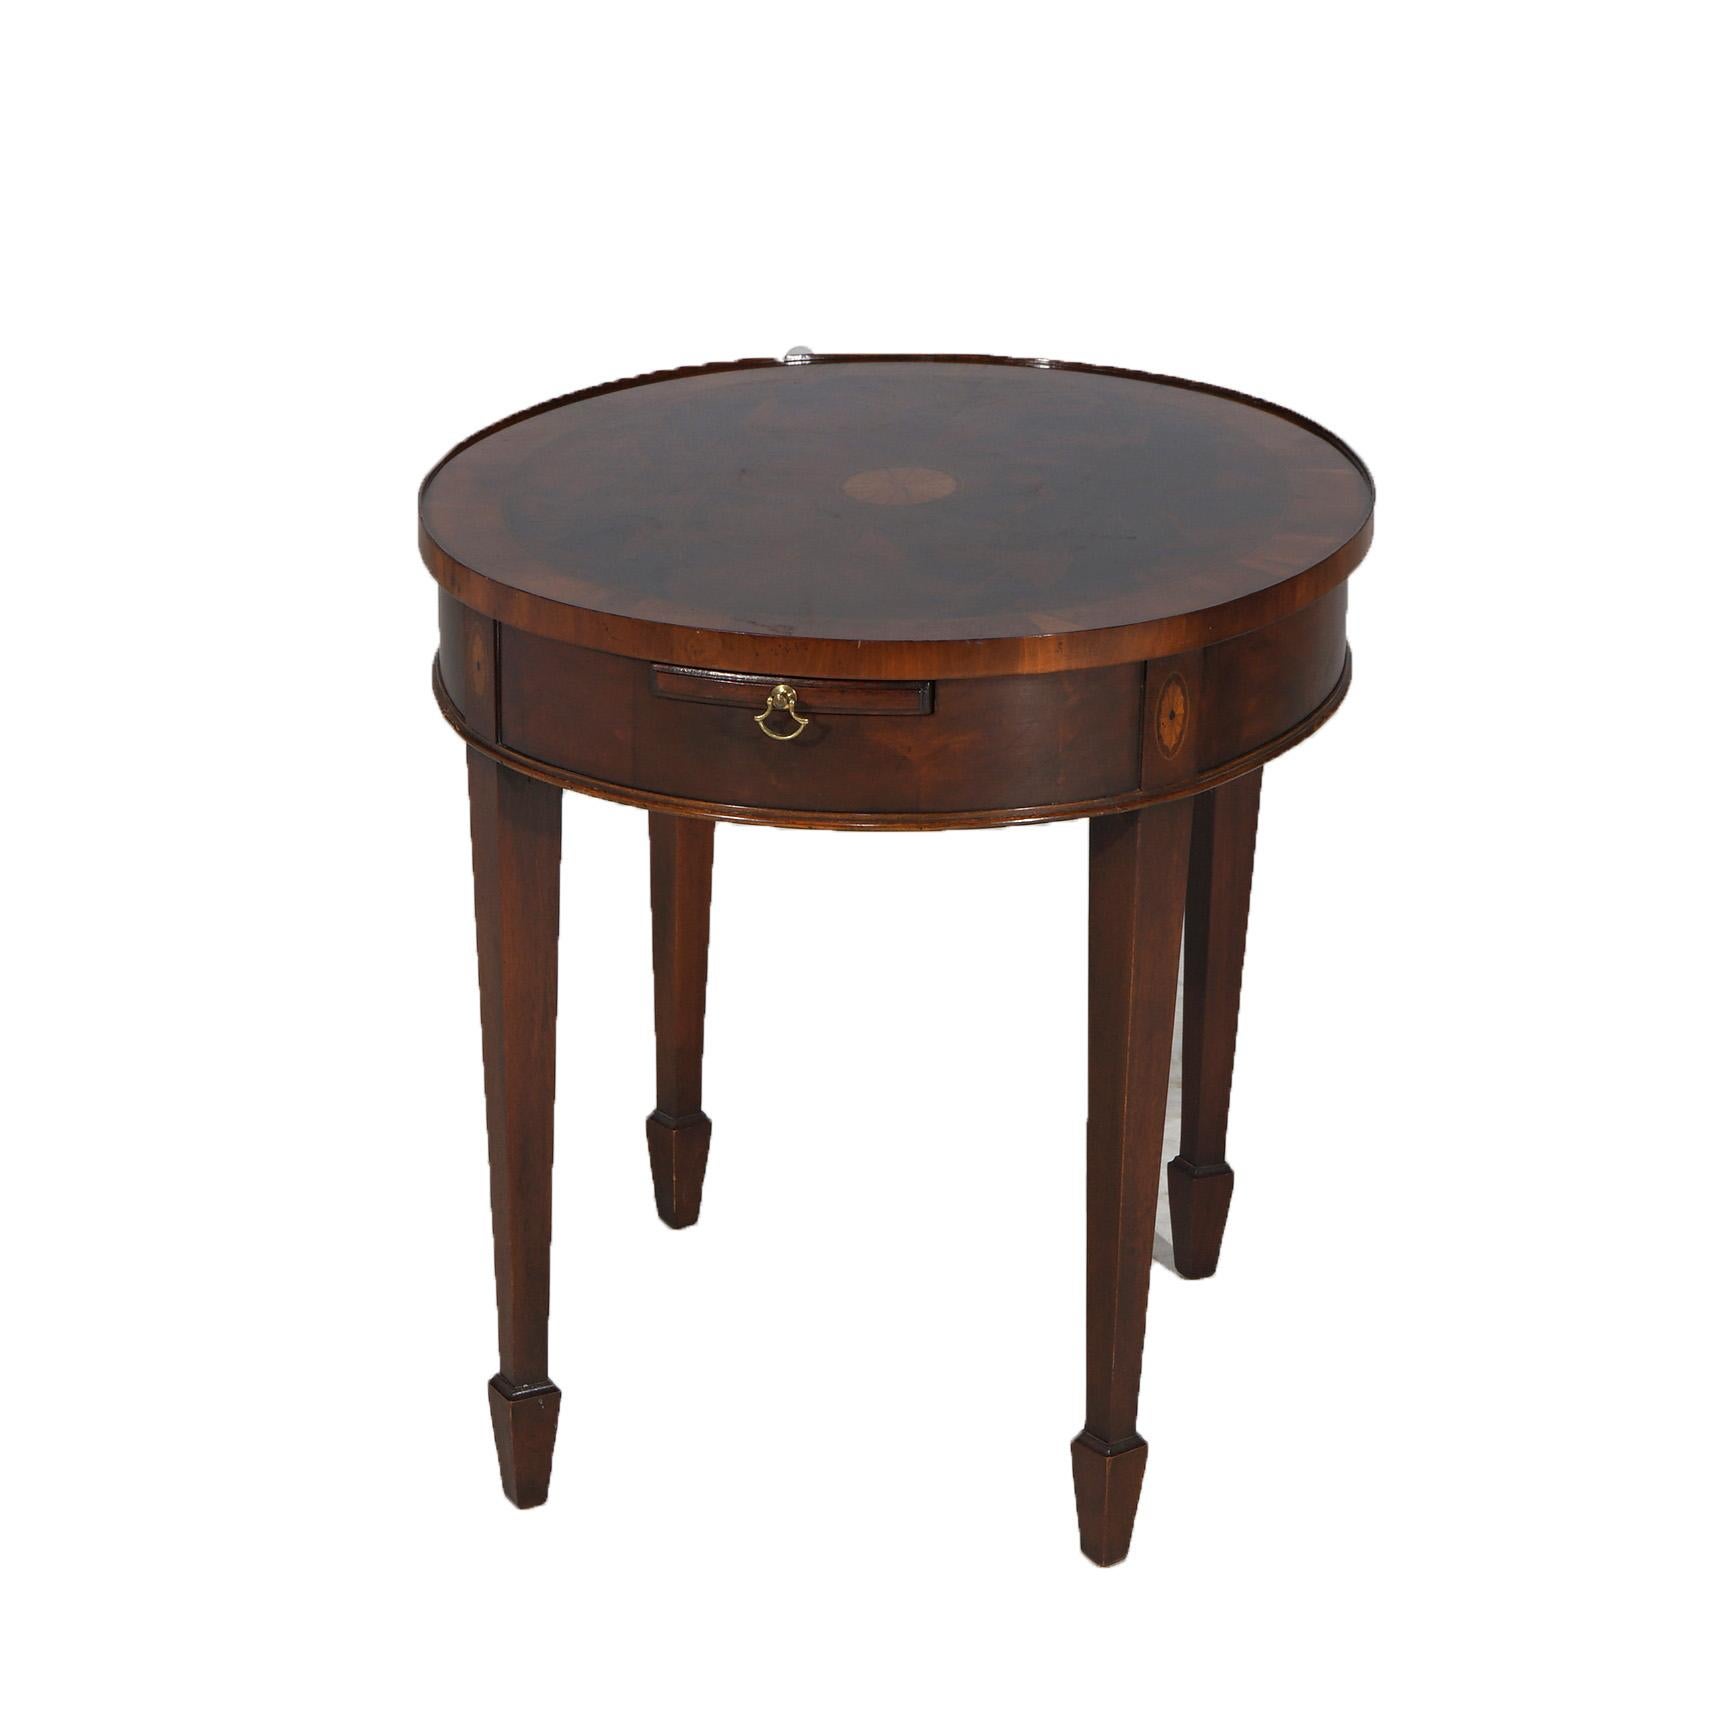 Inlay Hekman Copley Style Flame Mahogany & Satinwood Inlaid Side Table C1930 For Sale